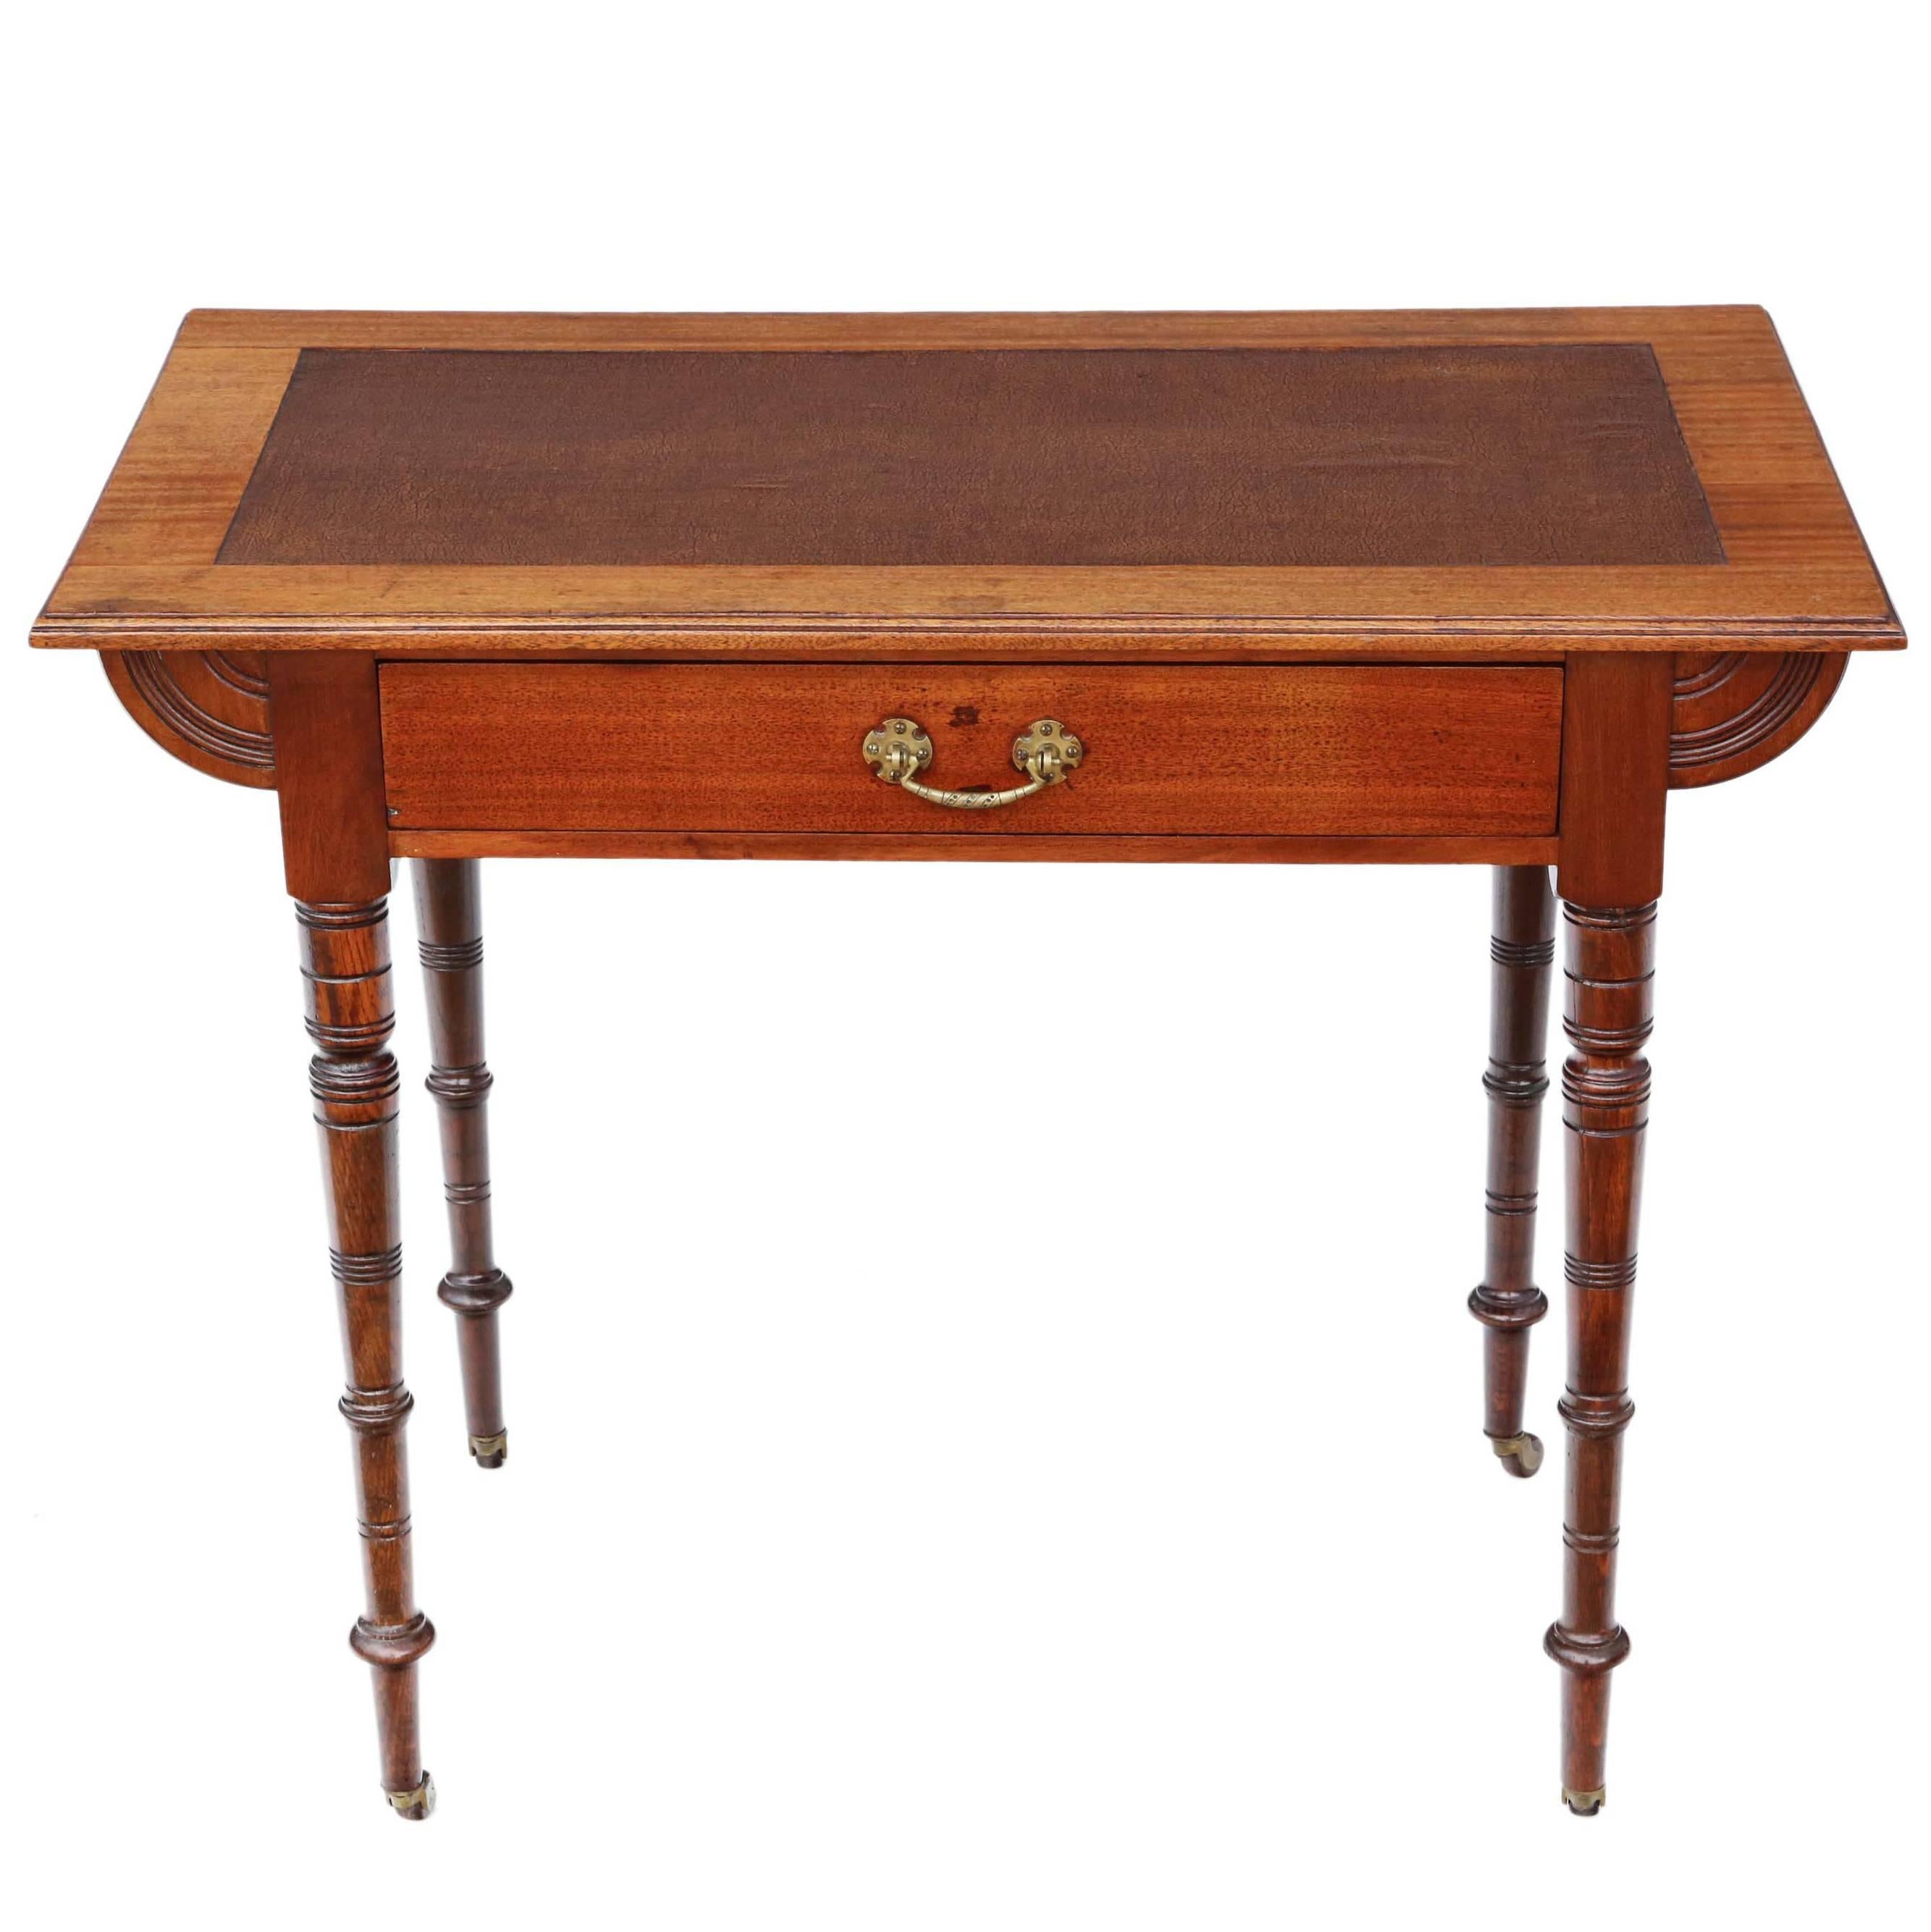 Antique Late Victorian circa 1900 Mahogany Desk or Writing Table